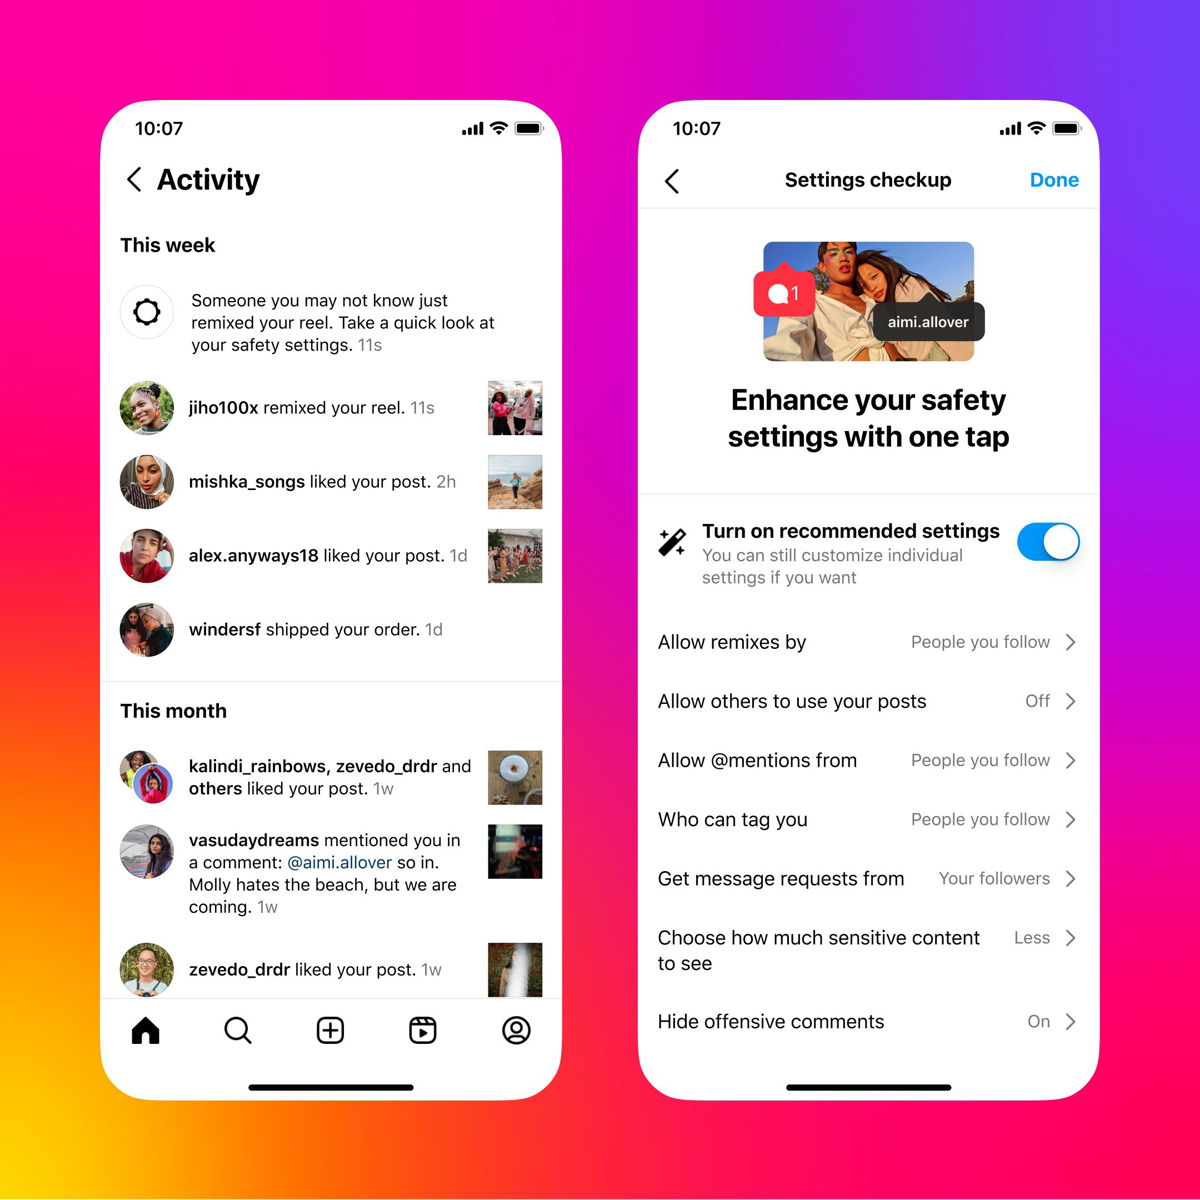 <i>Onur Dogman/SOPA Images/LightRocket/Getty Images</i><br/>Meta is set to roll out new safety settings for Facebook and Instagram users under the age of 18.